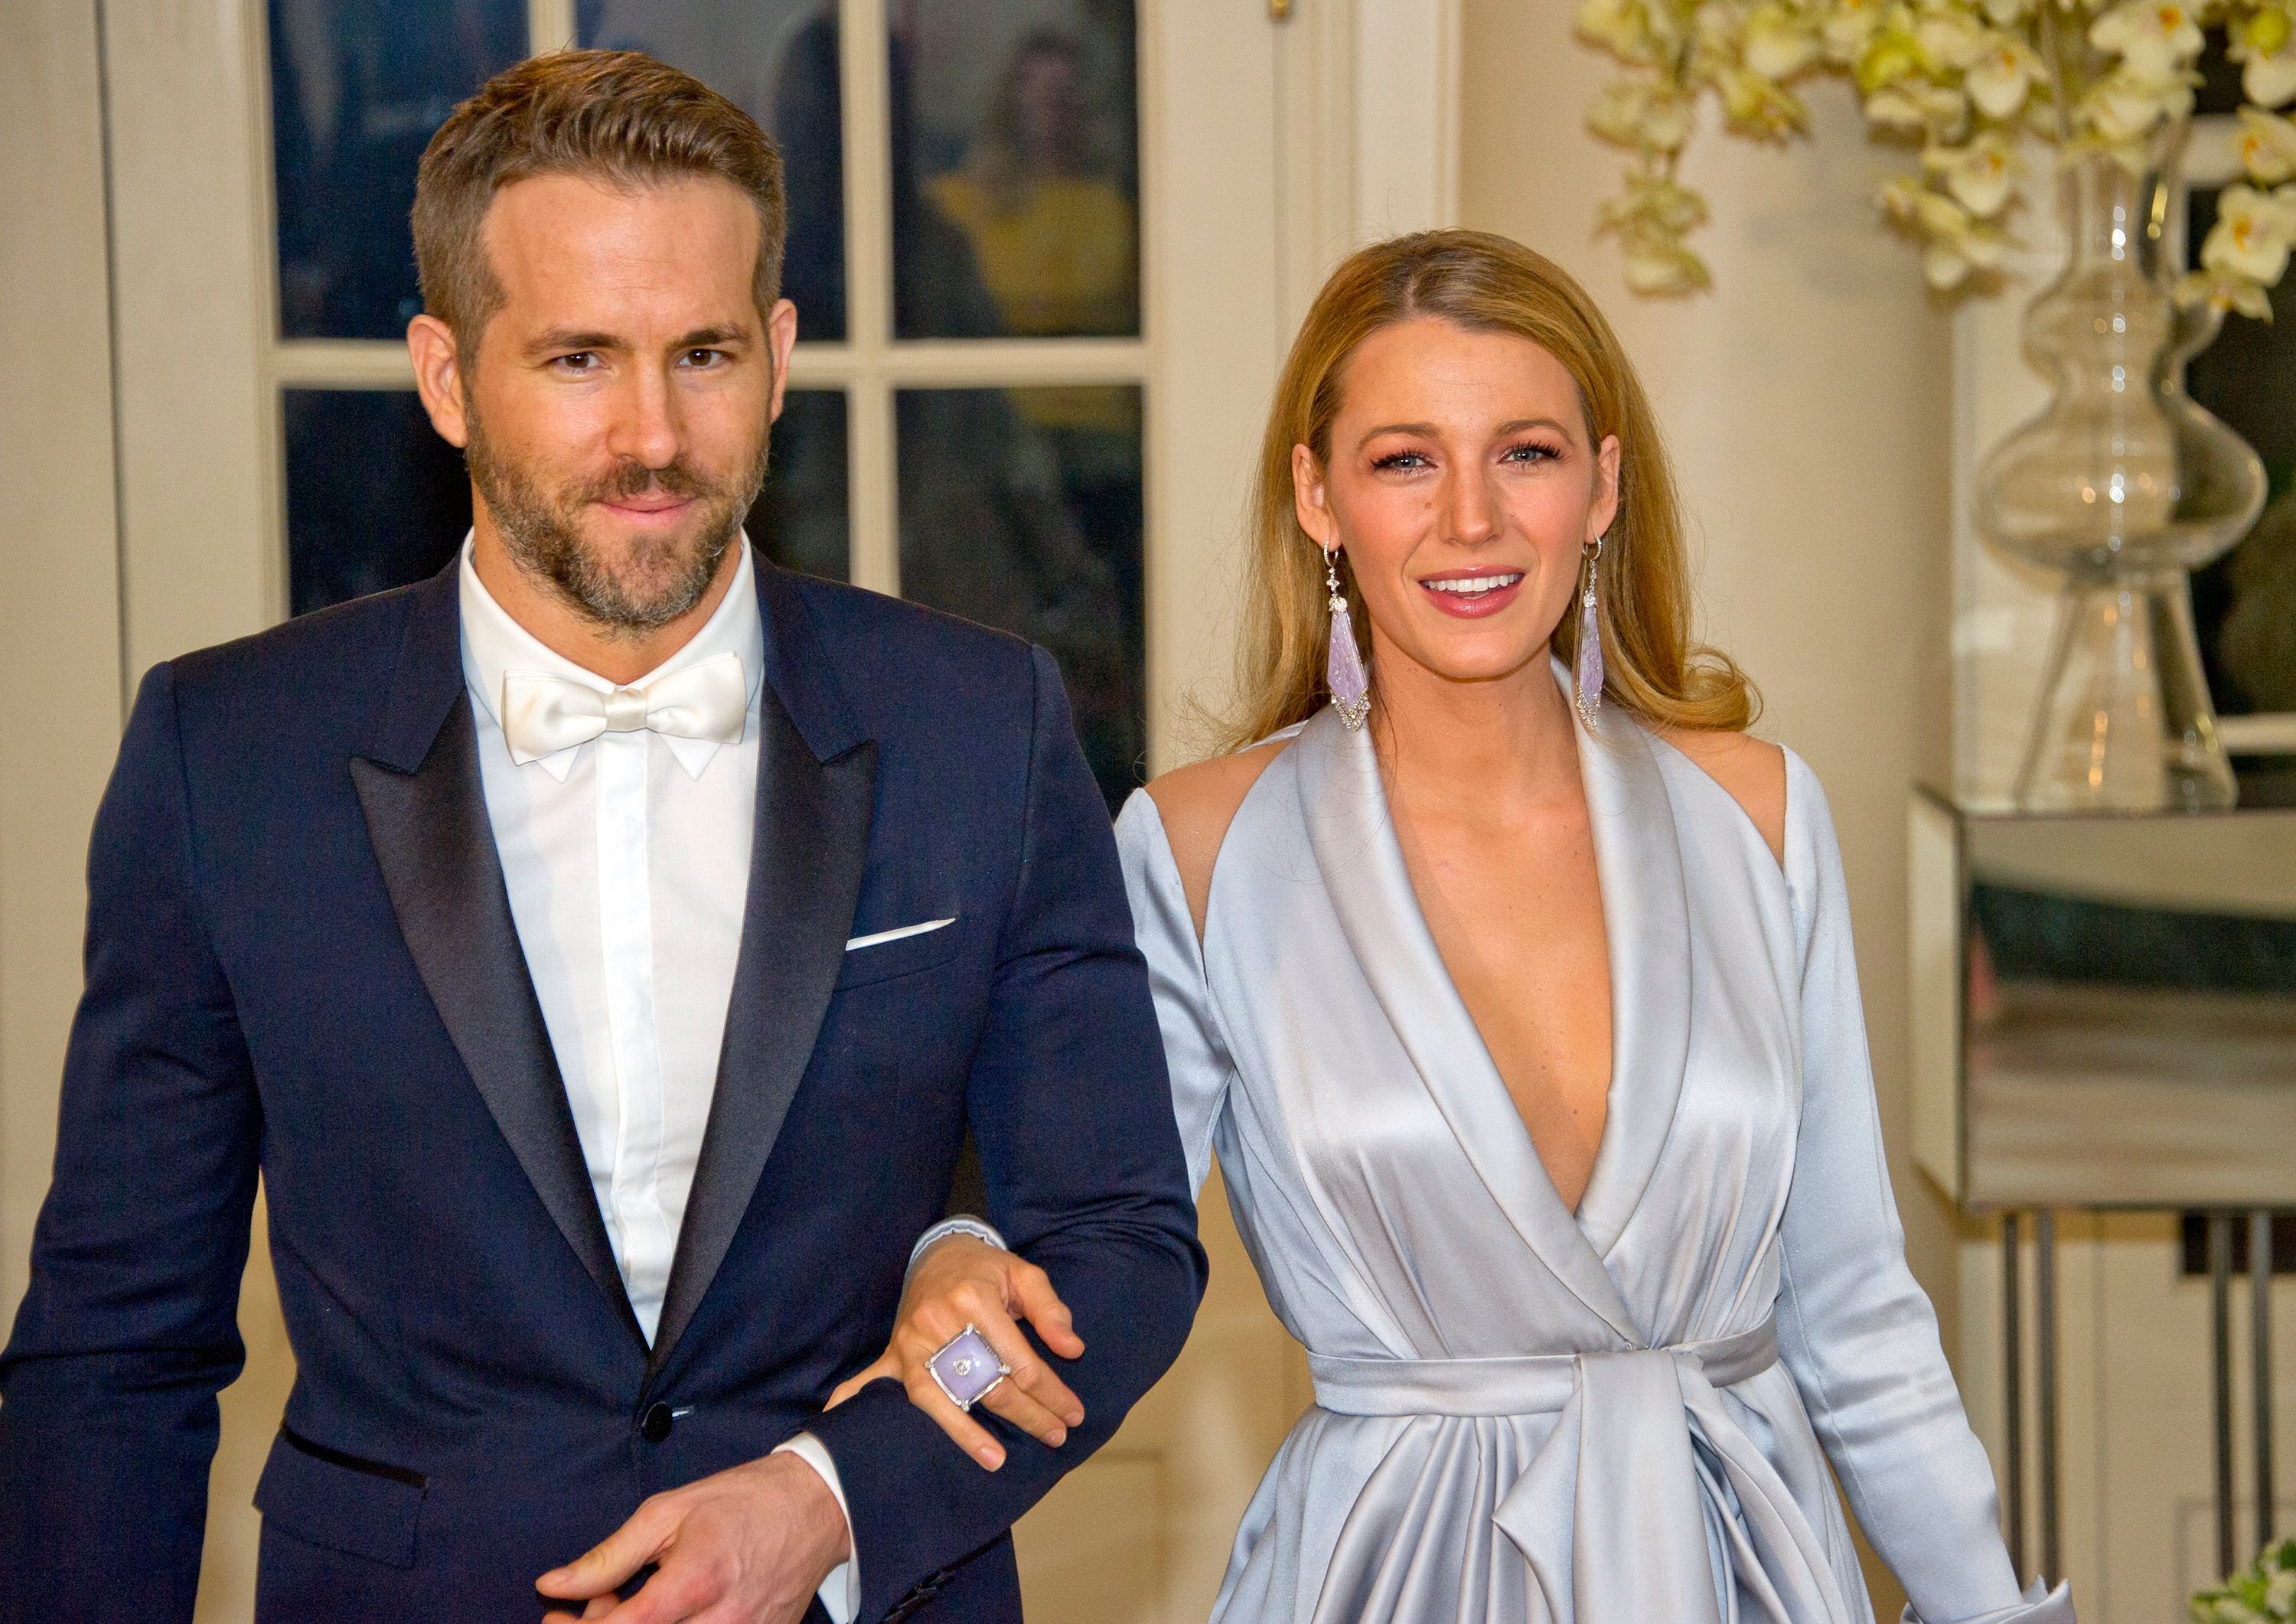 Ryan Reynolds and Blake Lively at a State Dinner in honor of Canadian Prime Minister Trudeau at the White House on March 10, 2016 | Photo: Getty Images